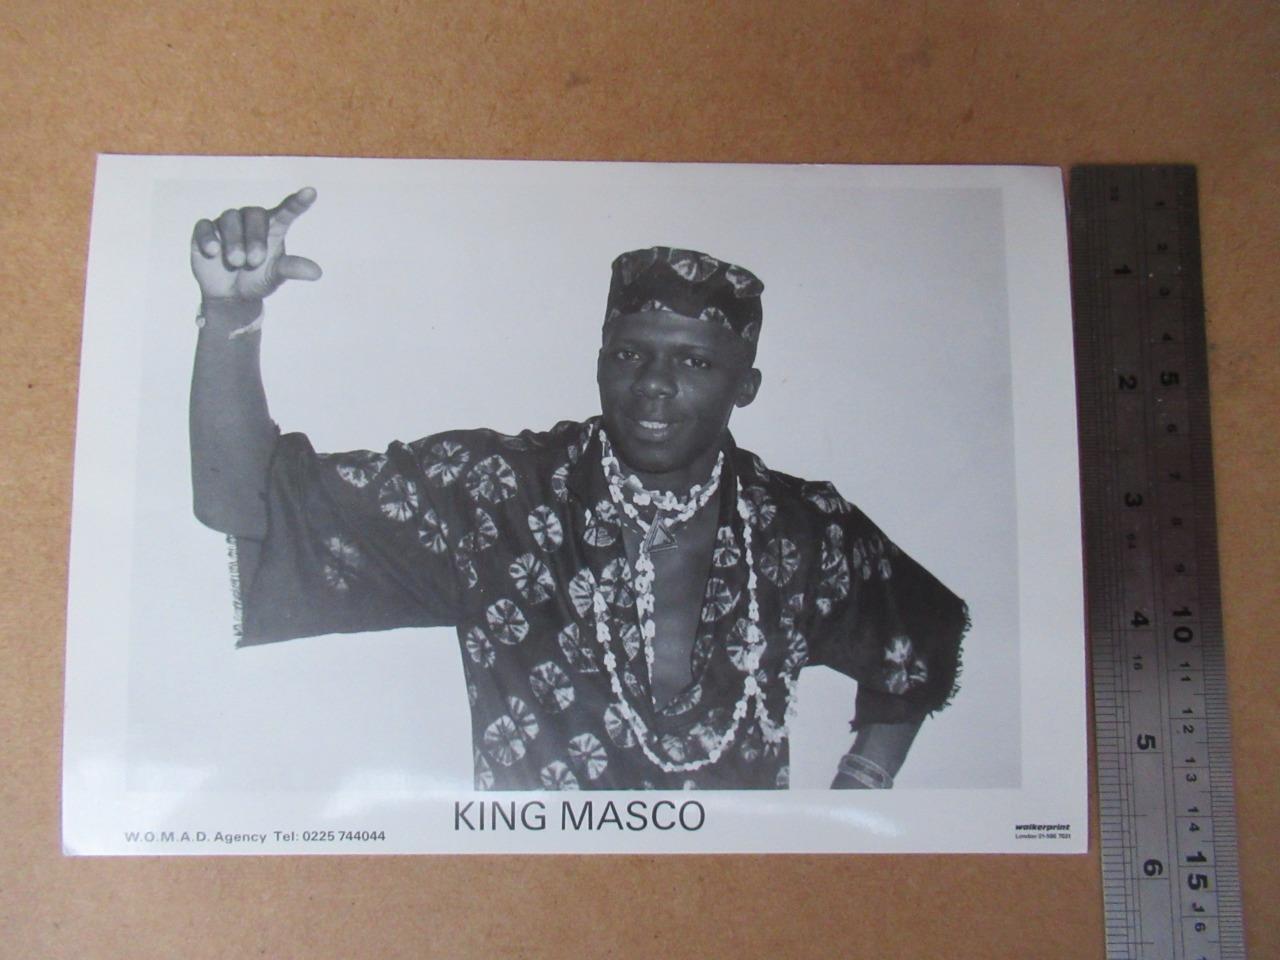 King Masco   small size Music  Promo Image vintage item see down listing